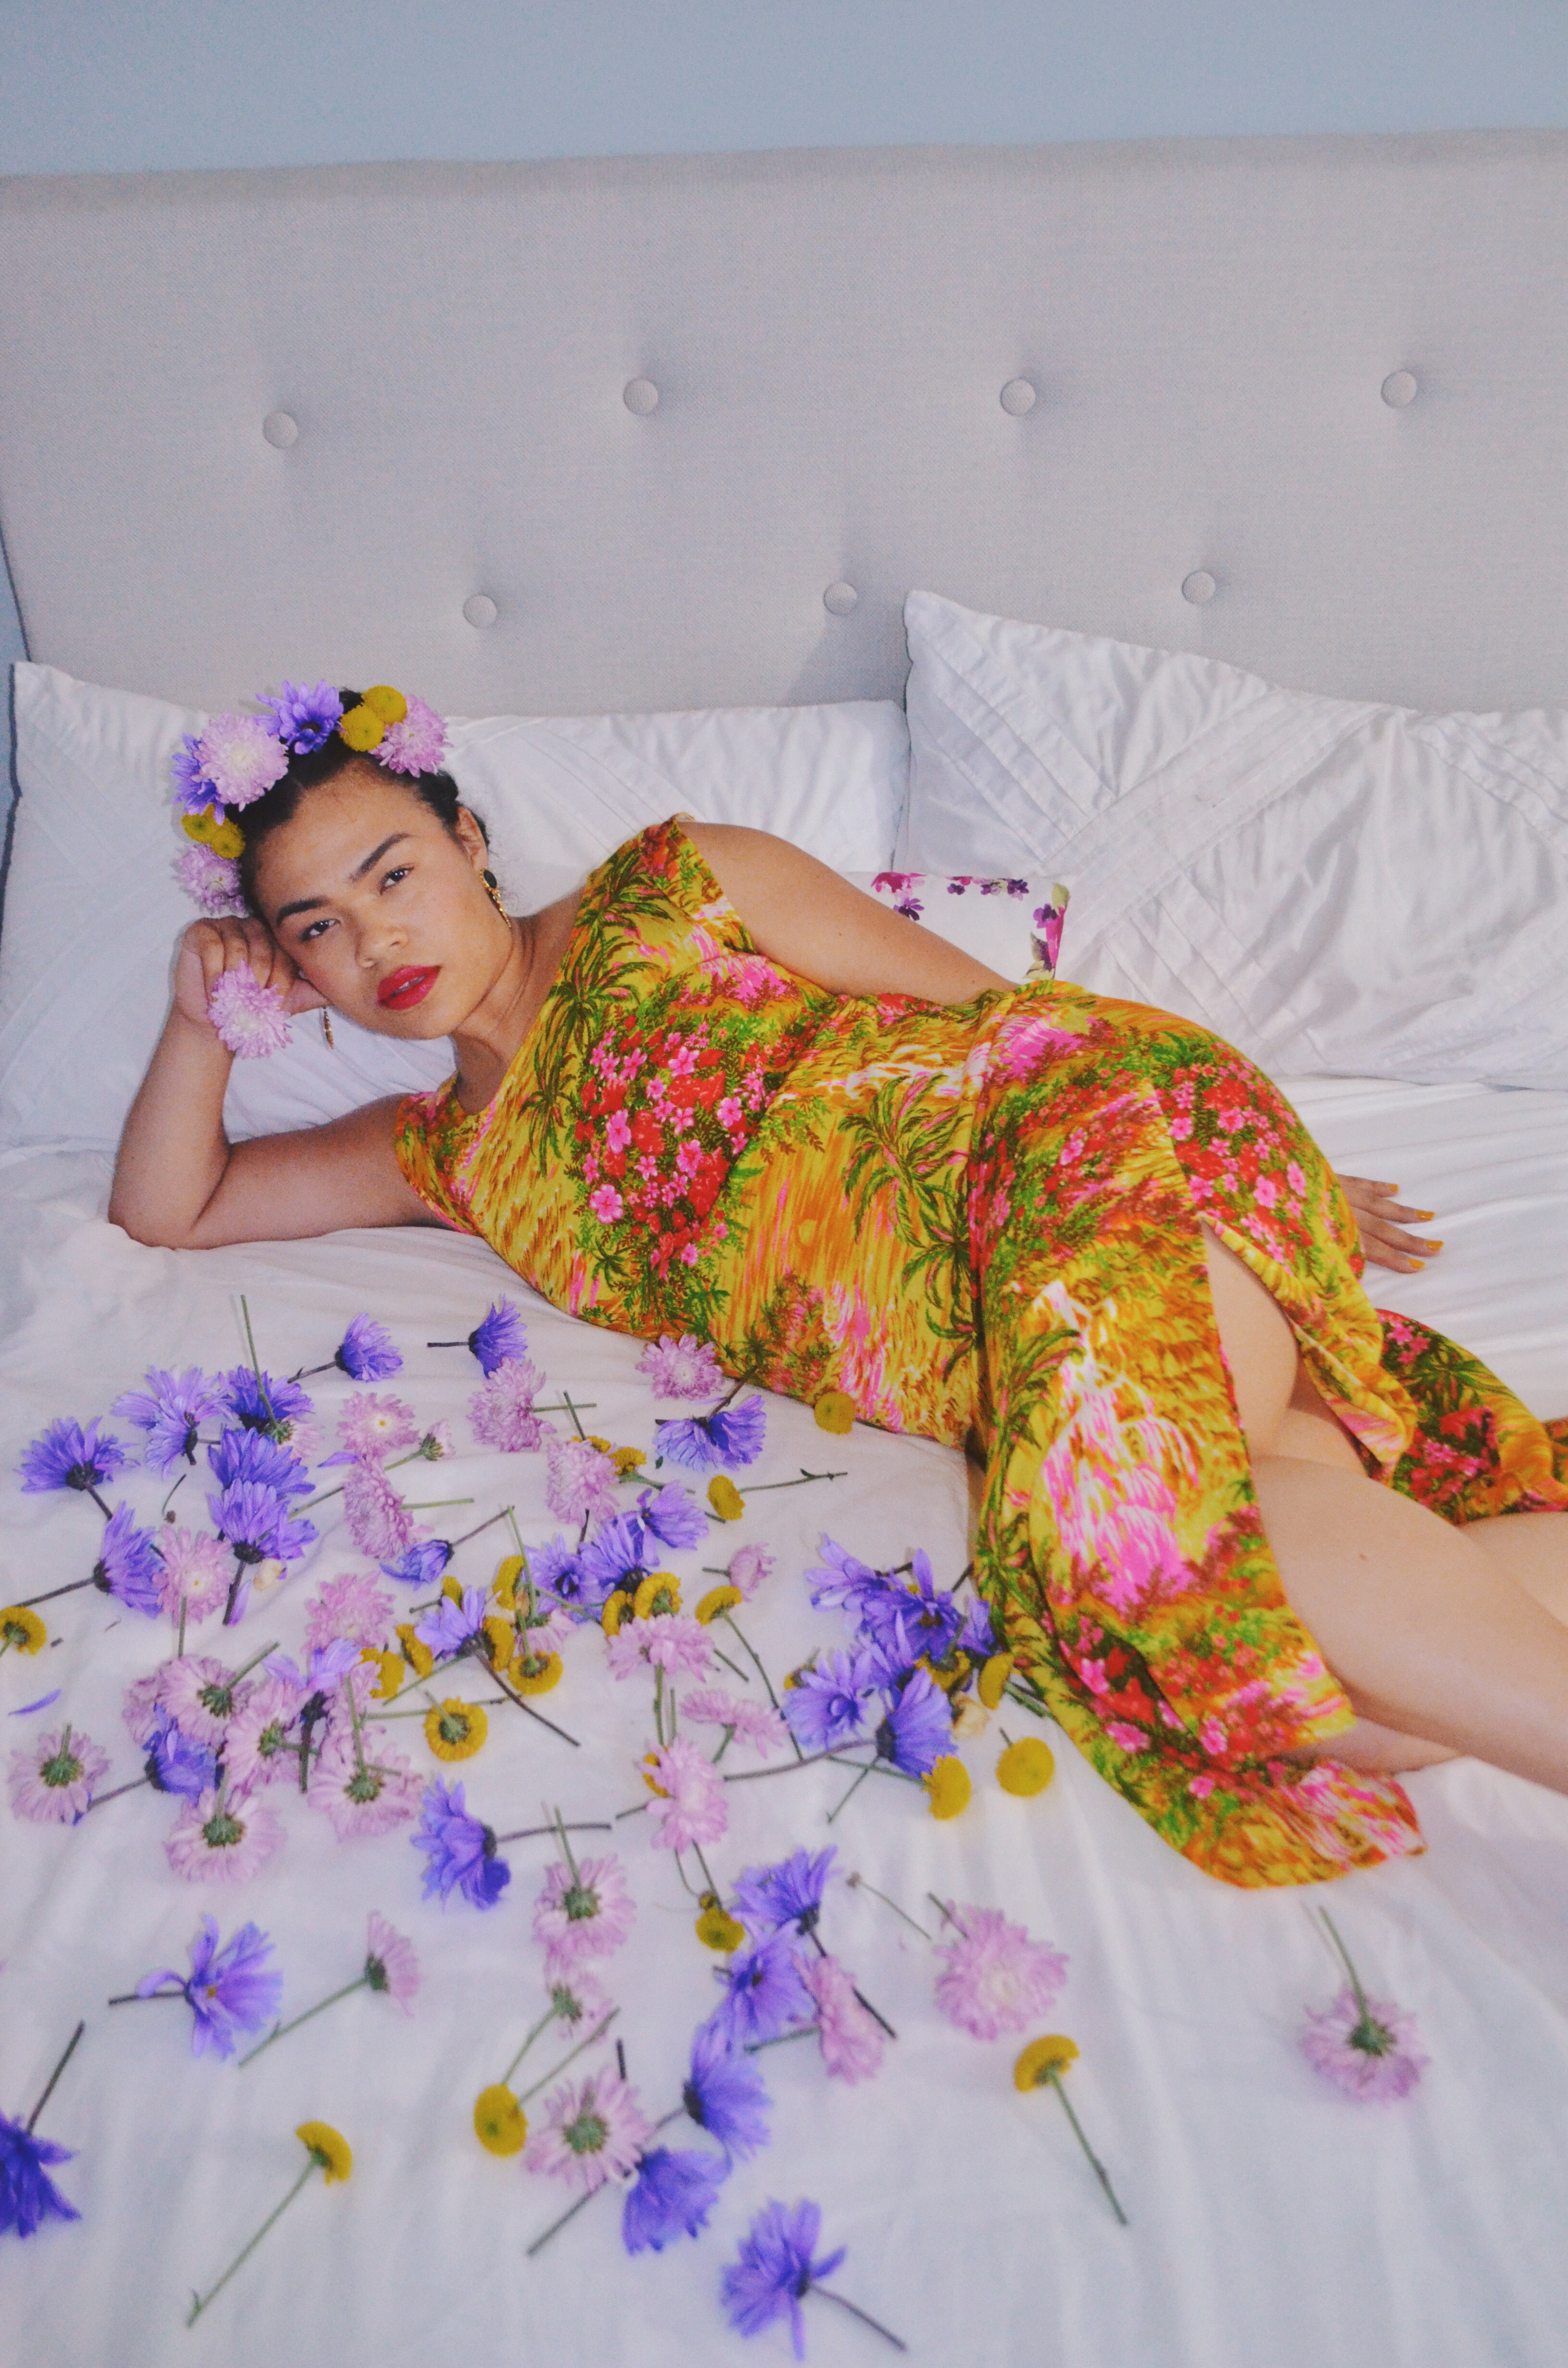 Frida in Bed || Frida Digging Deeper - Self Portrait Series by Lala Lopez